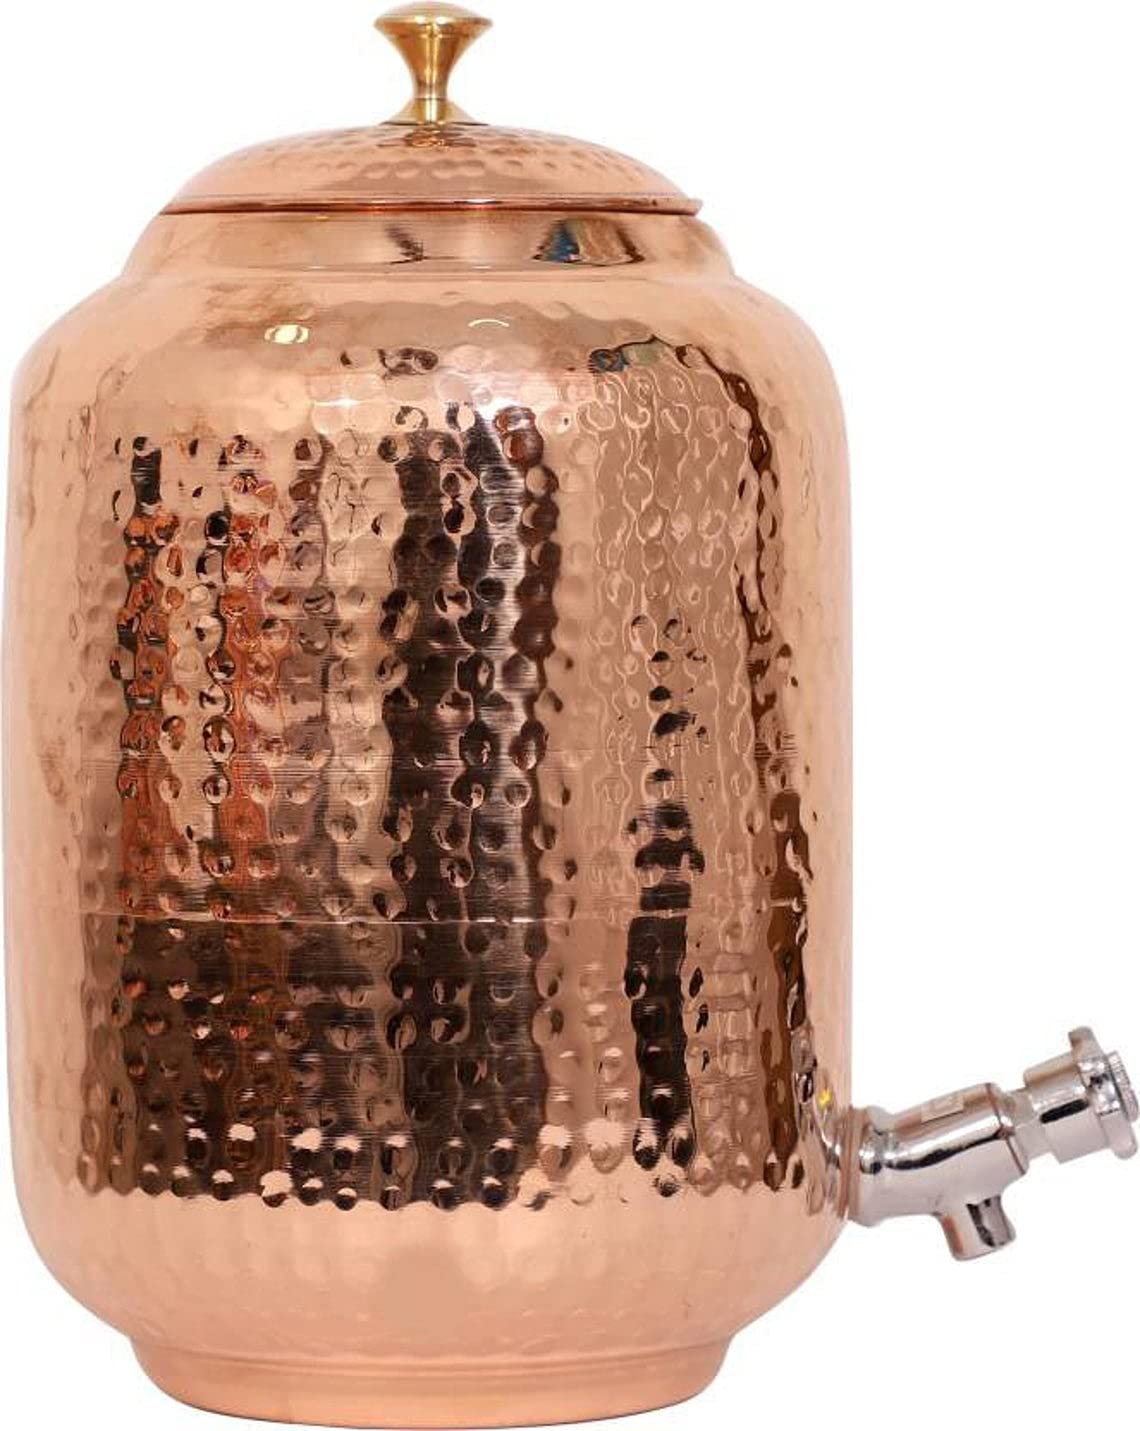 Hand Crunch Pure copper drinkware water dispenser - 8L- hammered finish- Pot ayurveda health healing 8 Liter storage capacity water container tank with 2 matching tumbler glasses & 1 copper Bottle